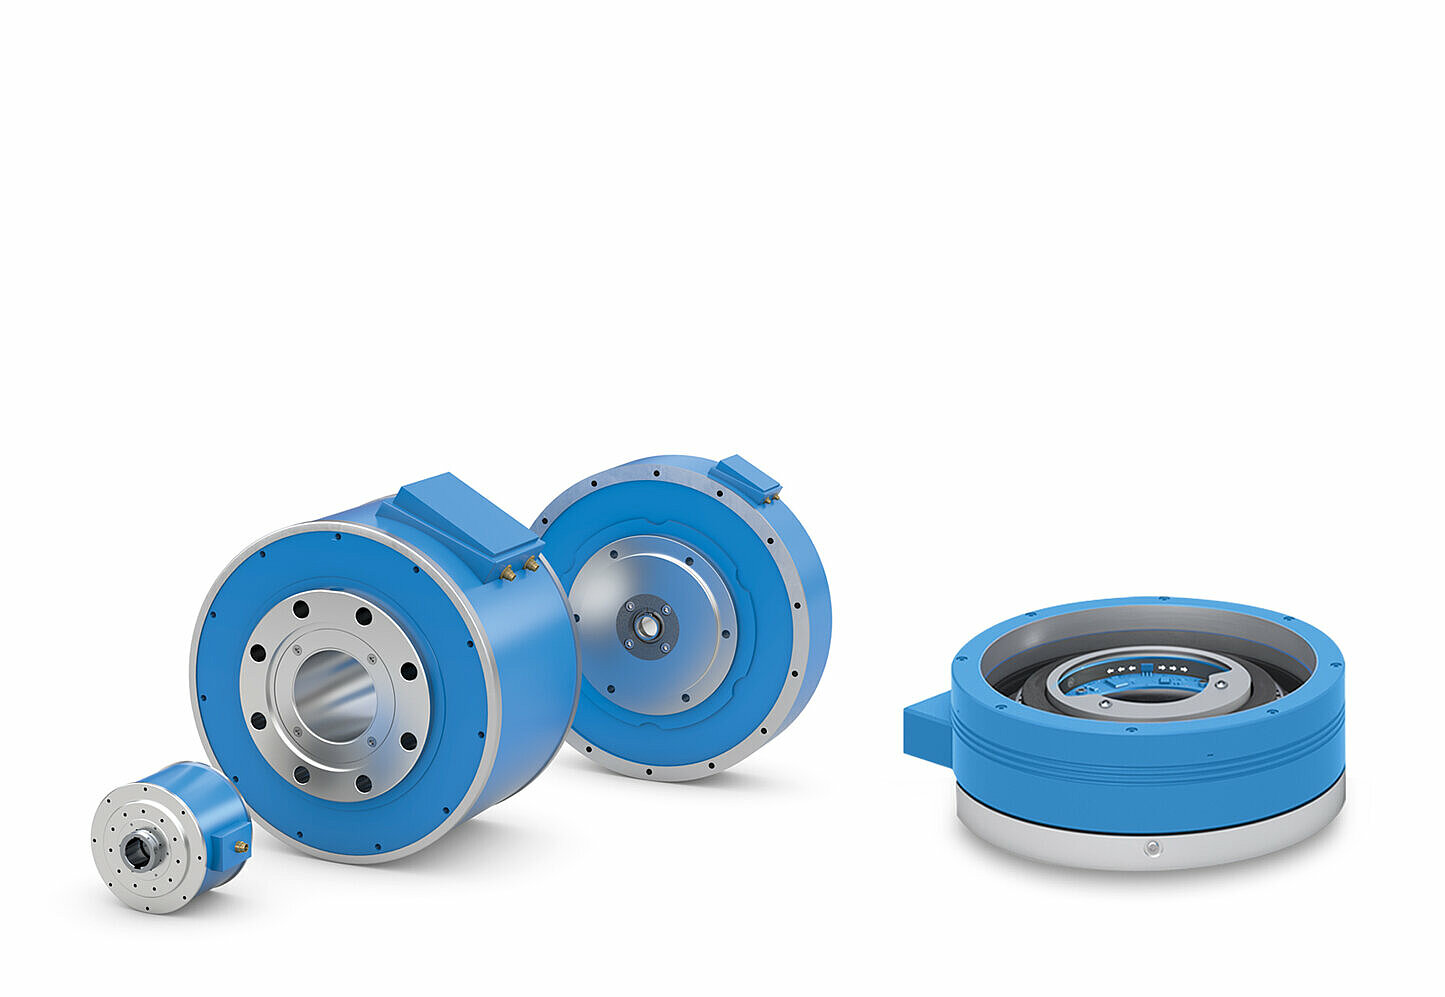 Encoder solutions by SIKO for rotary motor feedback